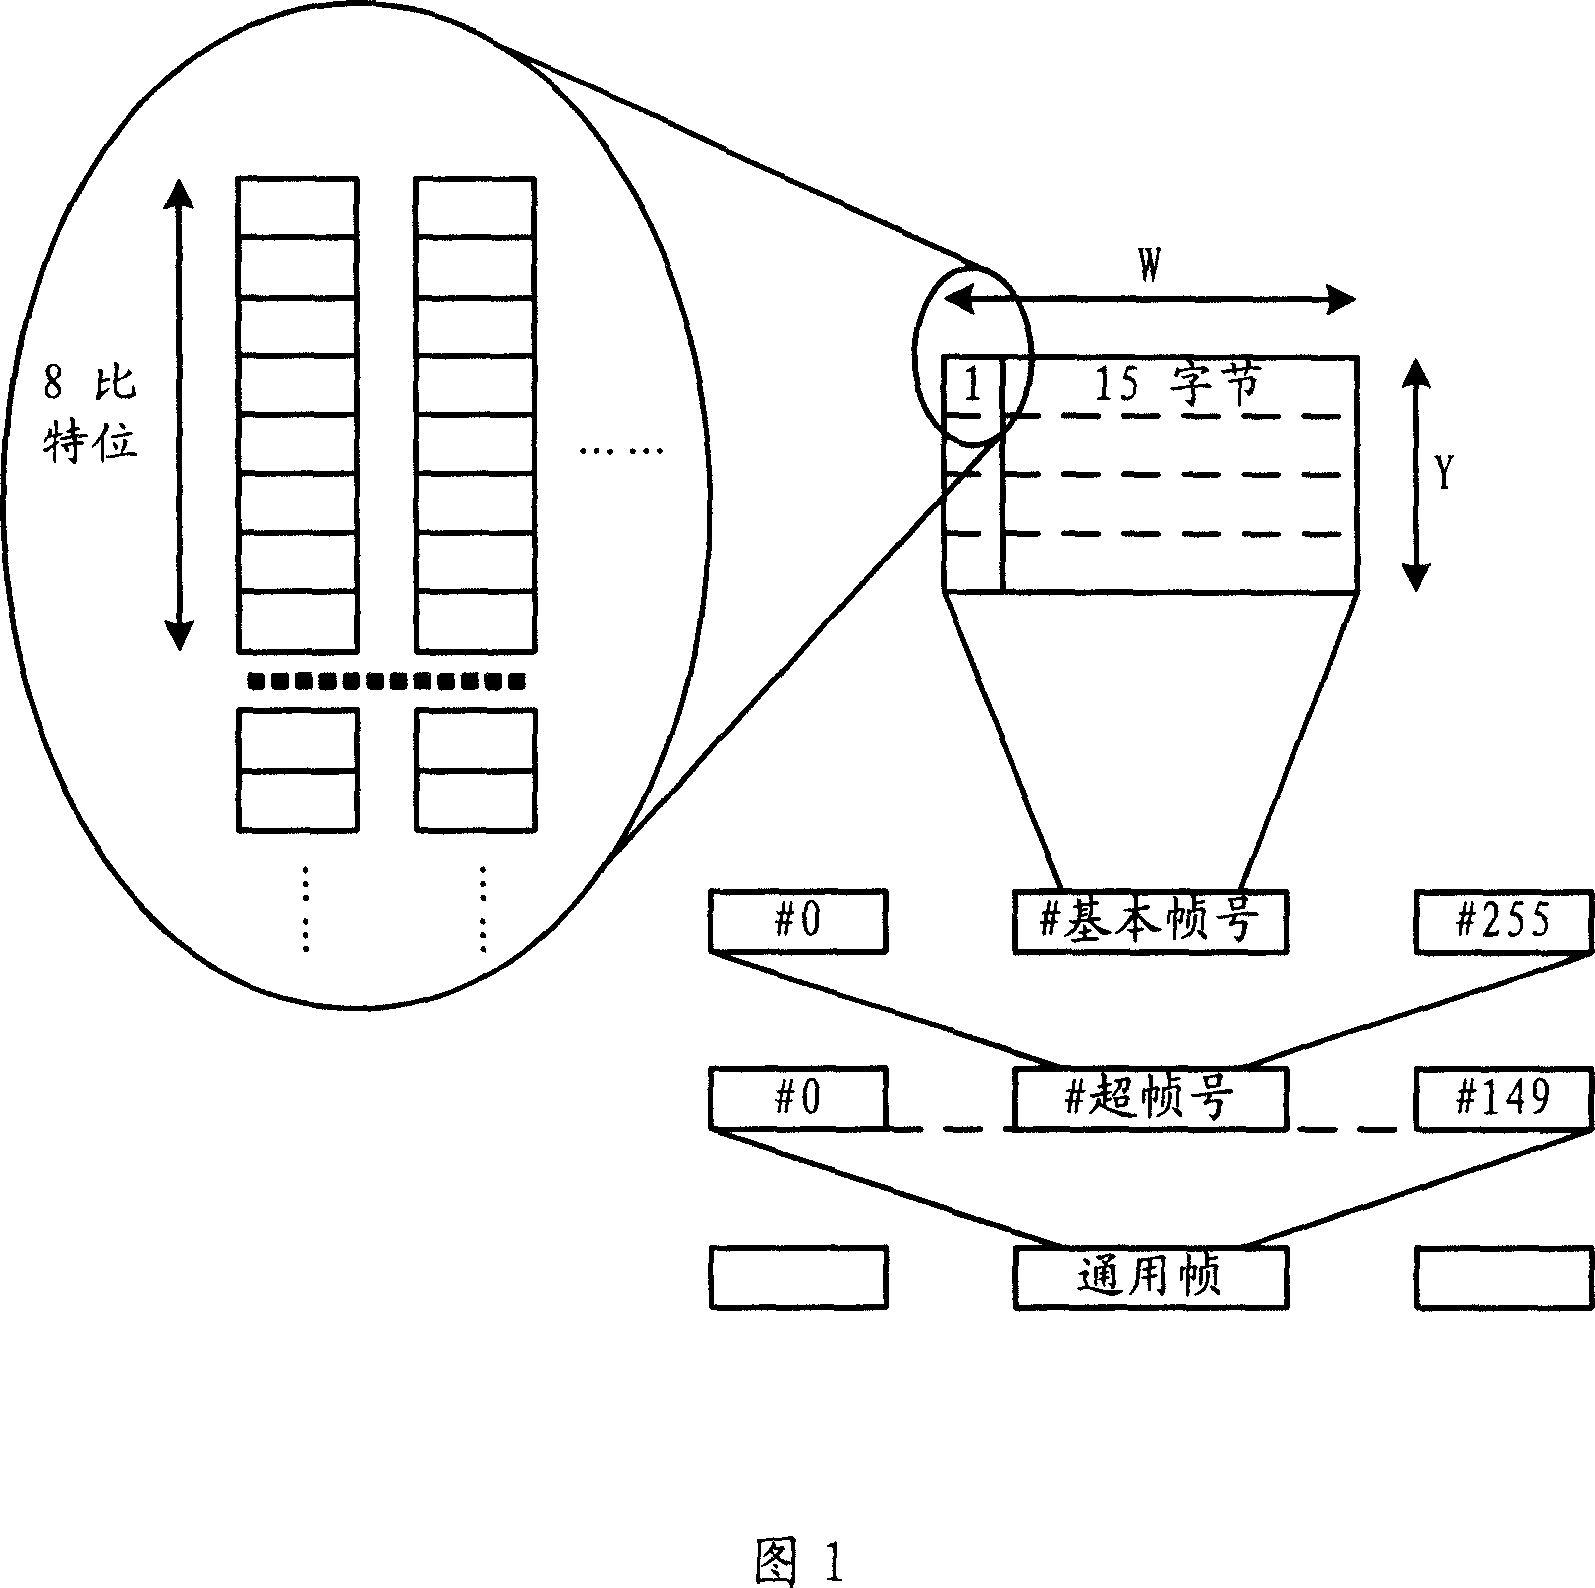 Method and system for transmitting wireless service data via public wireless interface